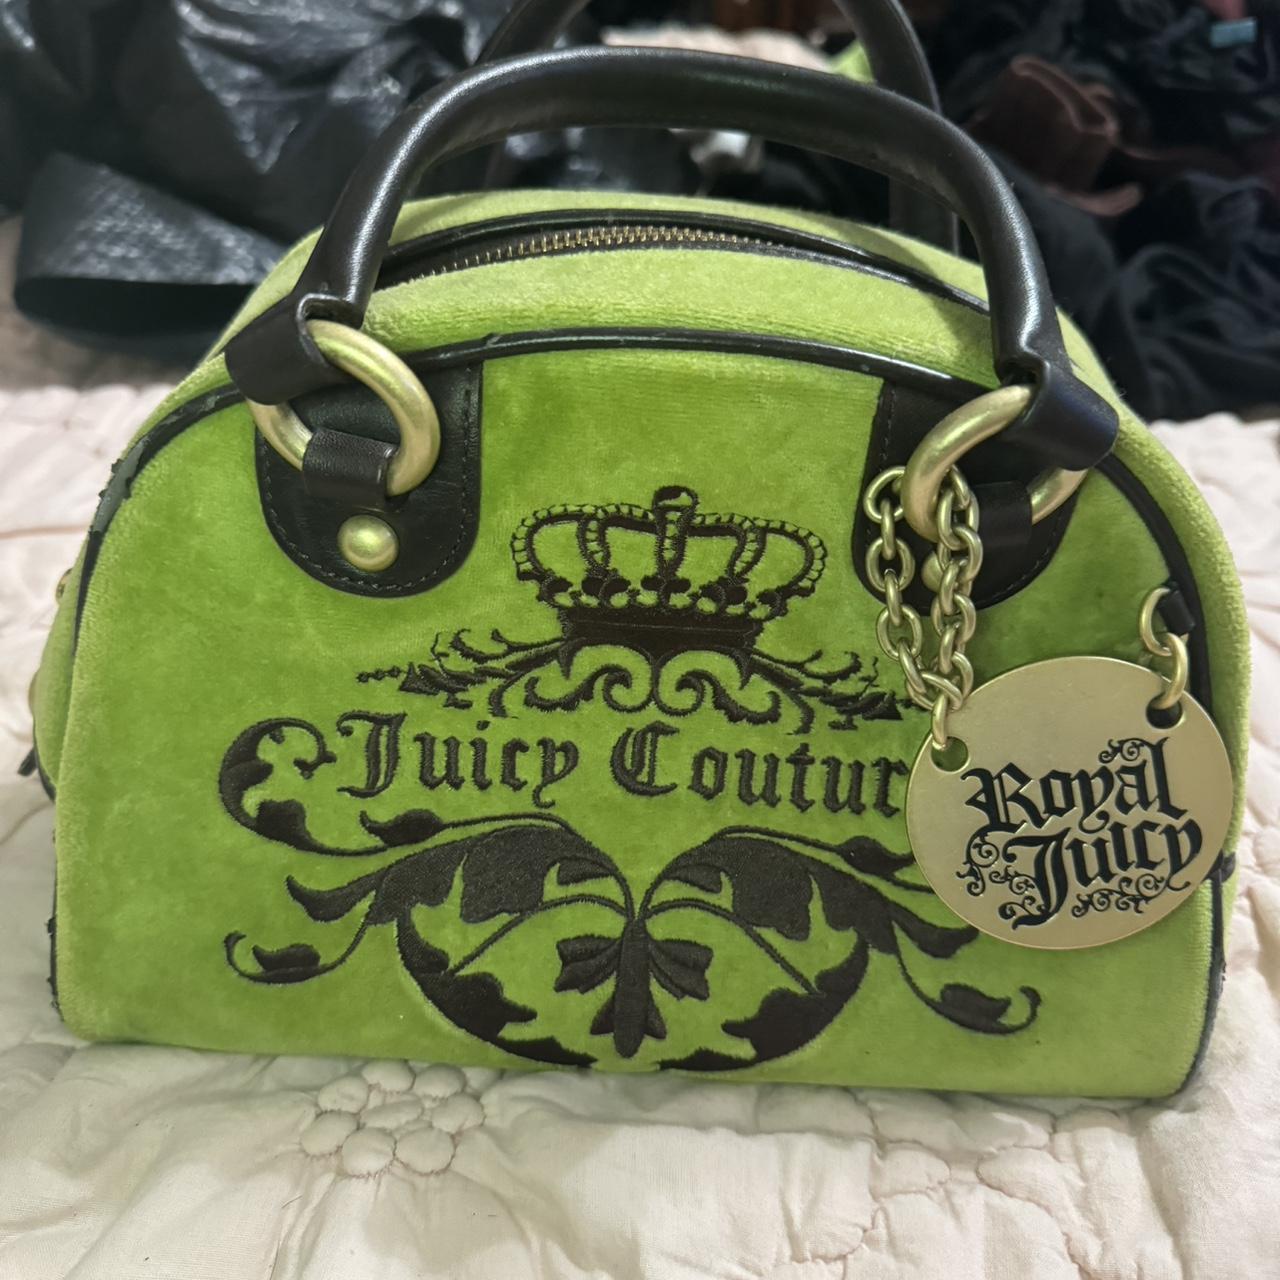 Juicy Couture Brown Quilted Bags & Handbags for Women for sale | eBay